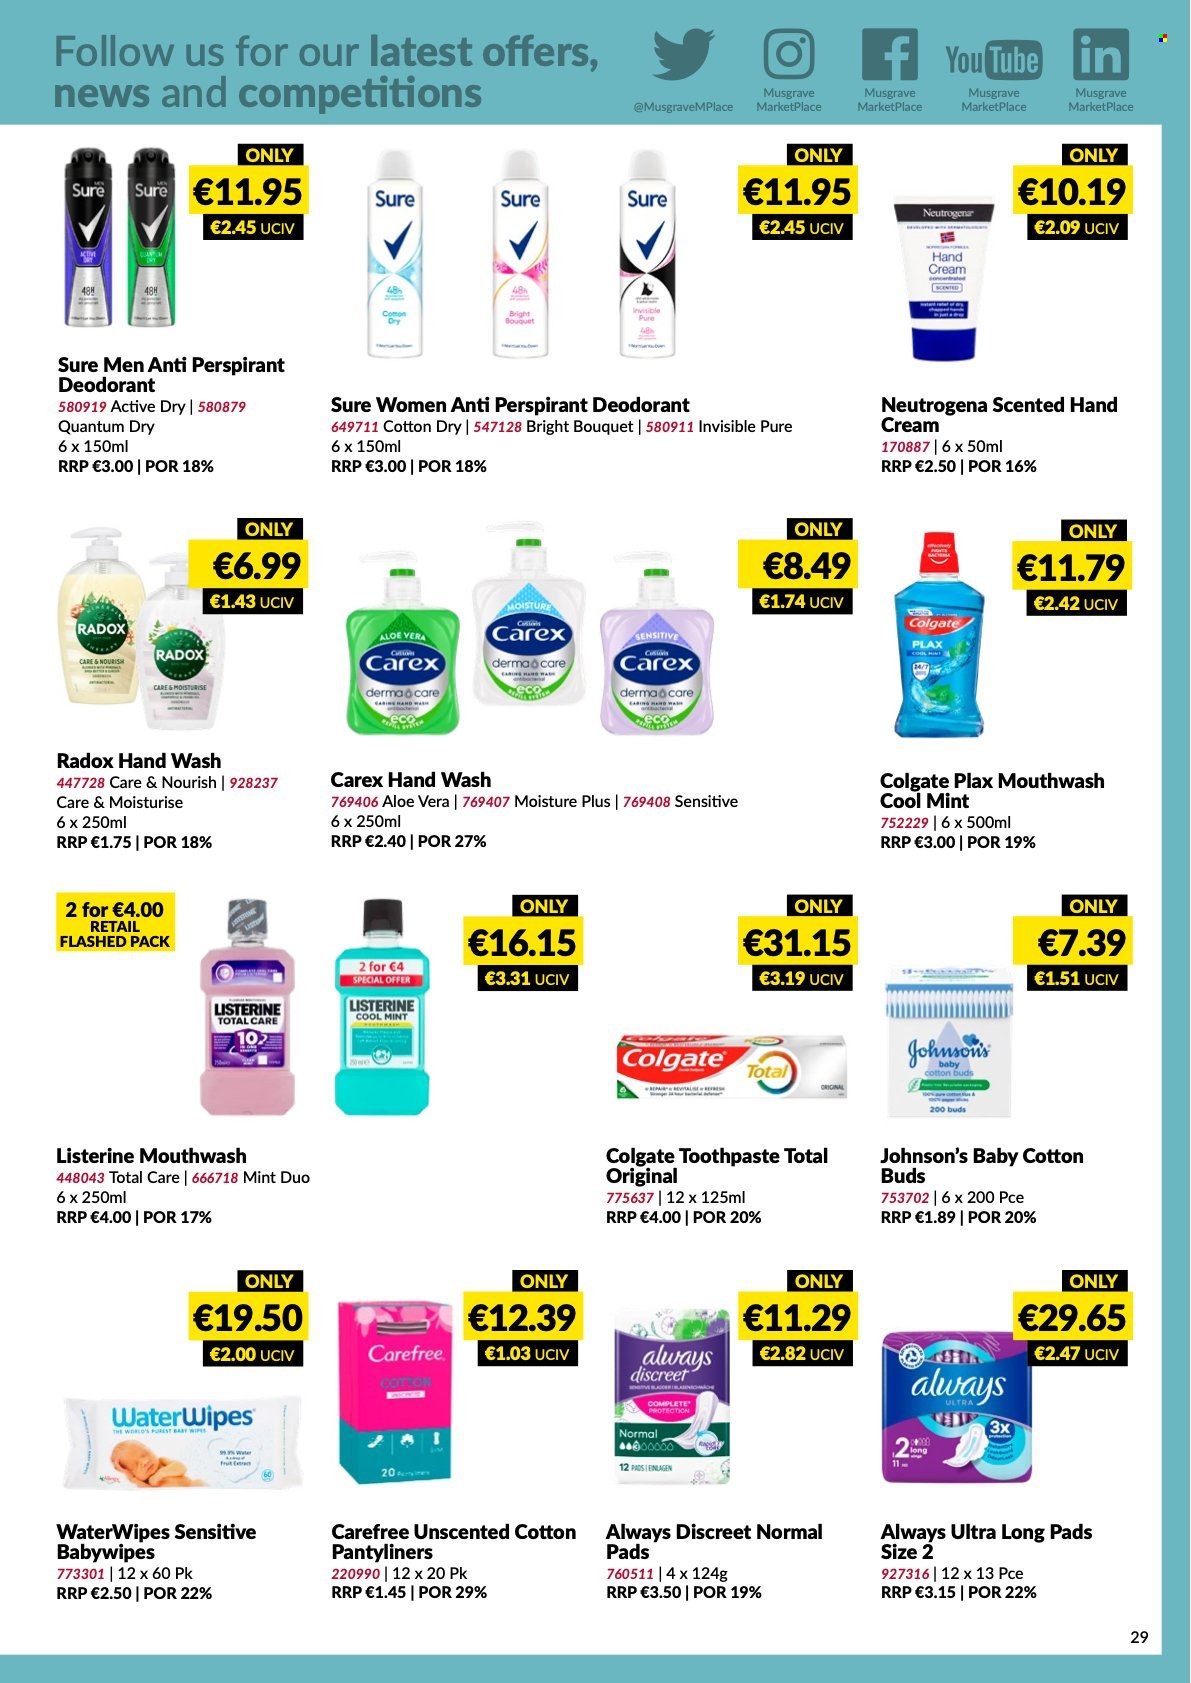 thumbnail - MUSGRAVE Market Place offer  - 12.03.2023 - 08.04.2023 - Sales products - wipes, Johnson's, hand wash, Radox, Carex, Colgate, Listerine, toothpaste, mouthwash, Plax, Always Discreet, Carefree, pantyliners, Neutrogena, hand cream, anti-perspirant, Sure, deodorant, bouquet. Page 29.